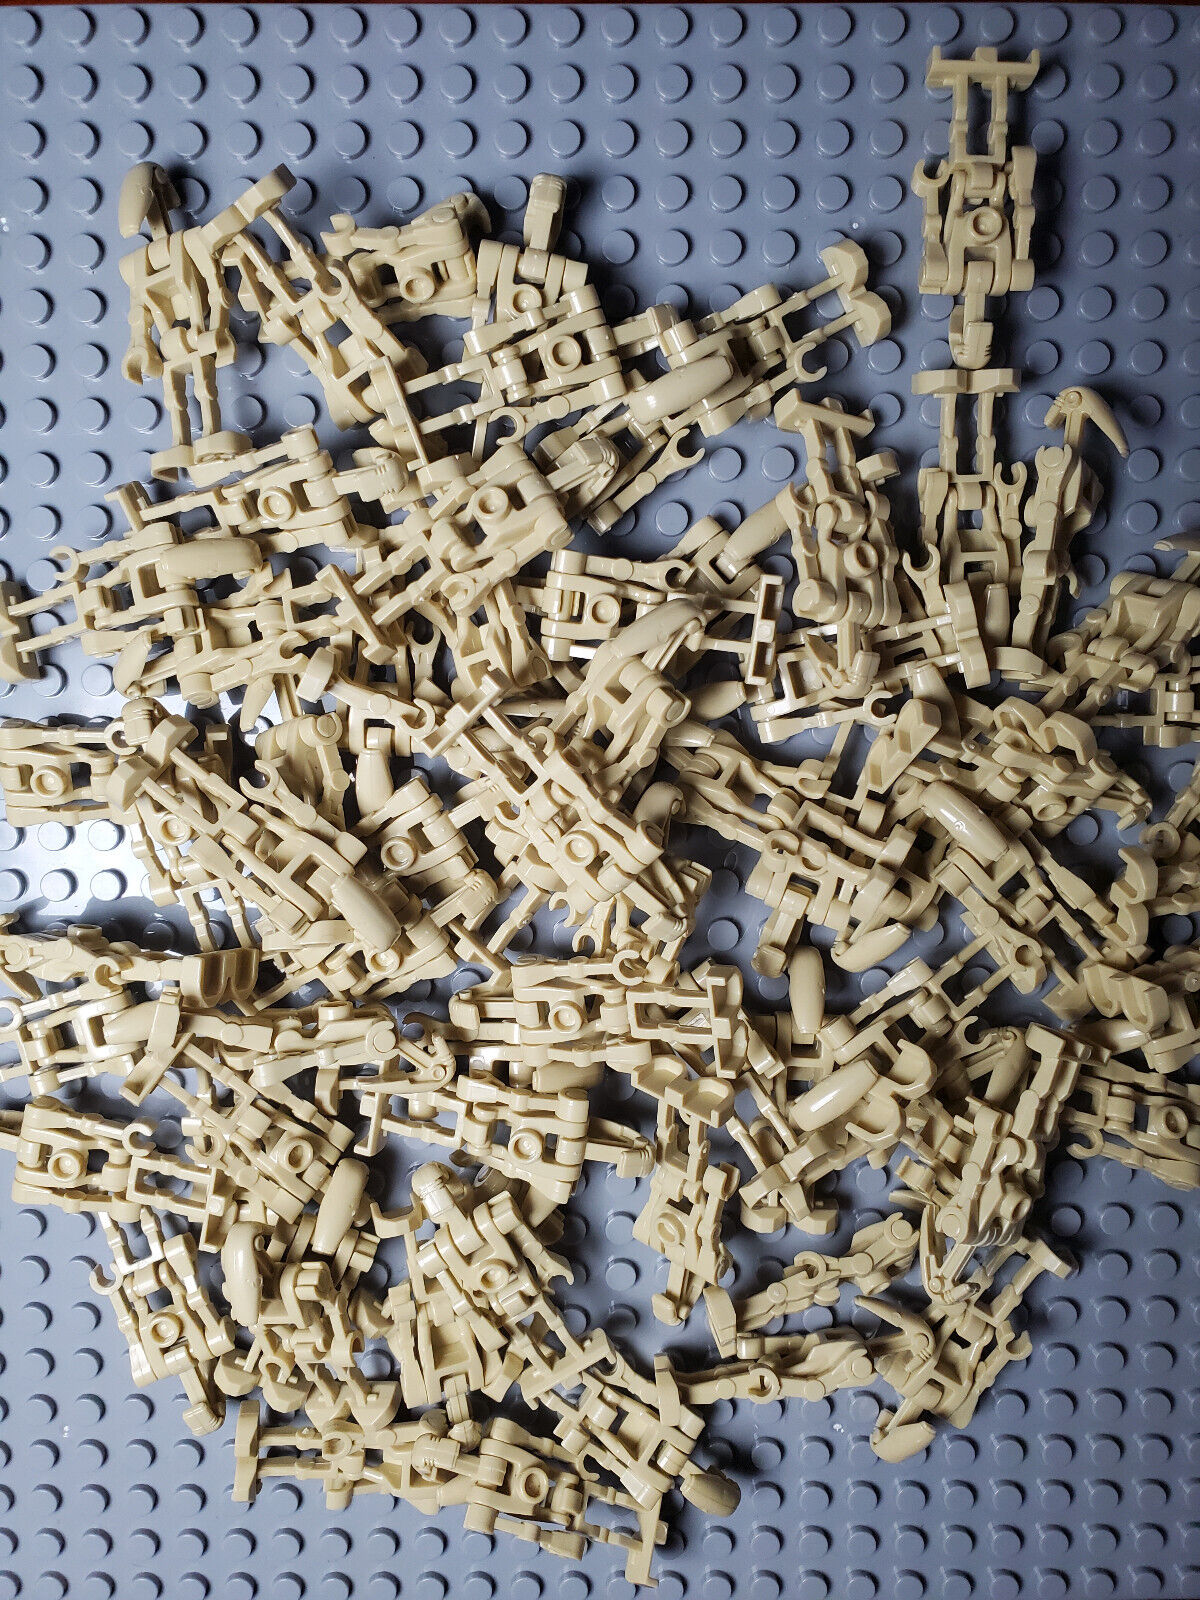 Star Wars Battle Droid Lot - 40 Minifigures (For Lego)